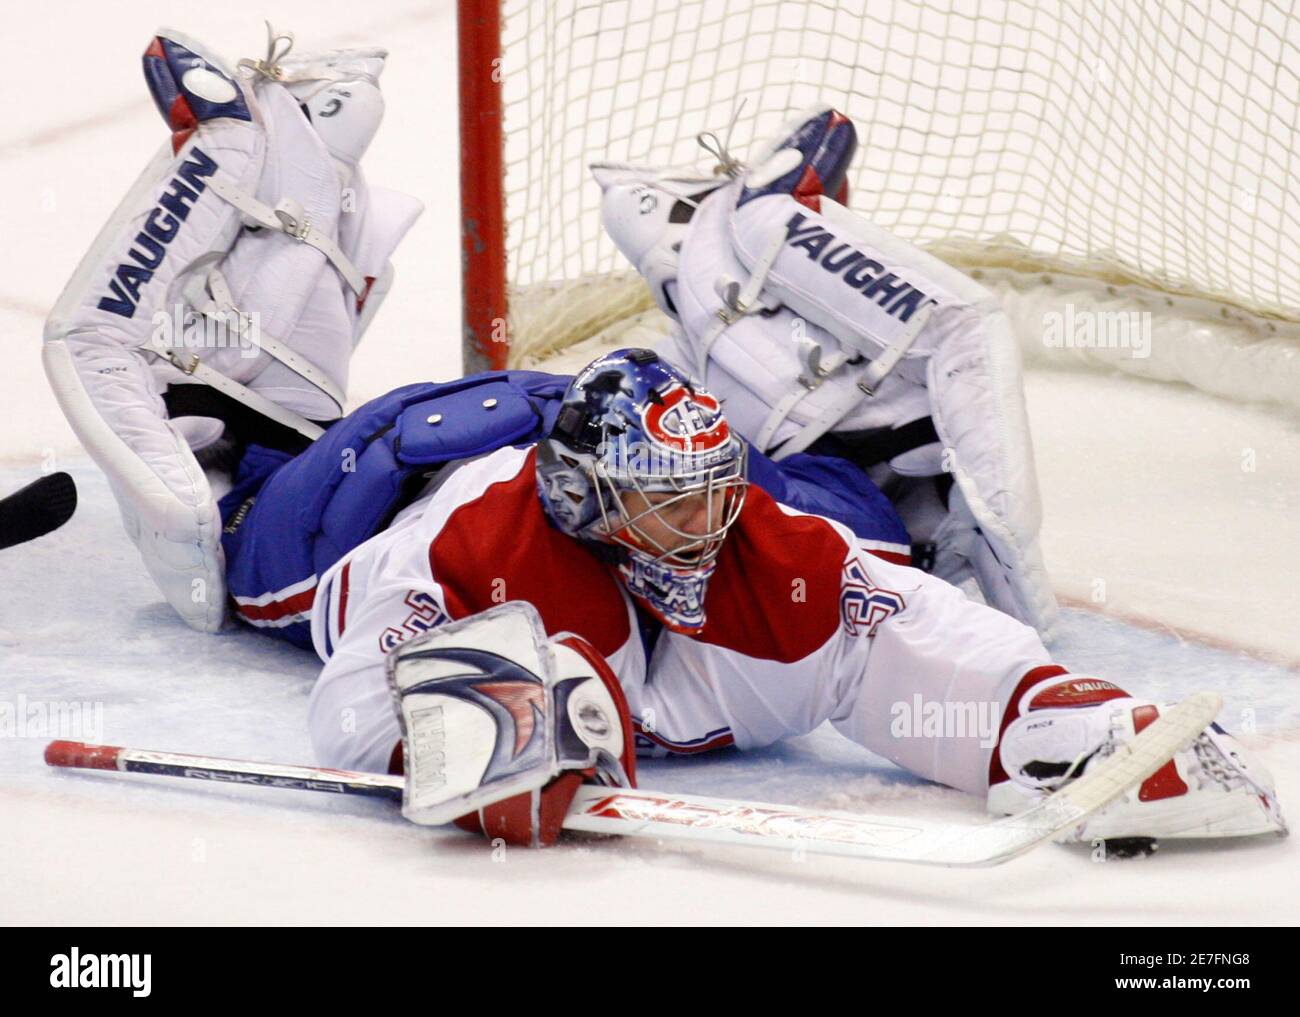 Montreal Canadiens' goaltender Carey Price dives to cover the puck against the Ottawa Senators during the second period of their NHL hockey game in Ottawa April 1, 2008.       REUTERS/Chris Wattie       (CANADA) Stock Photo